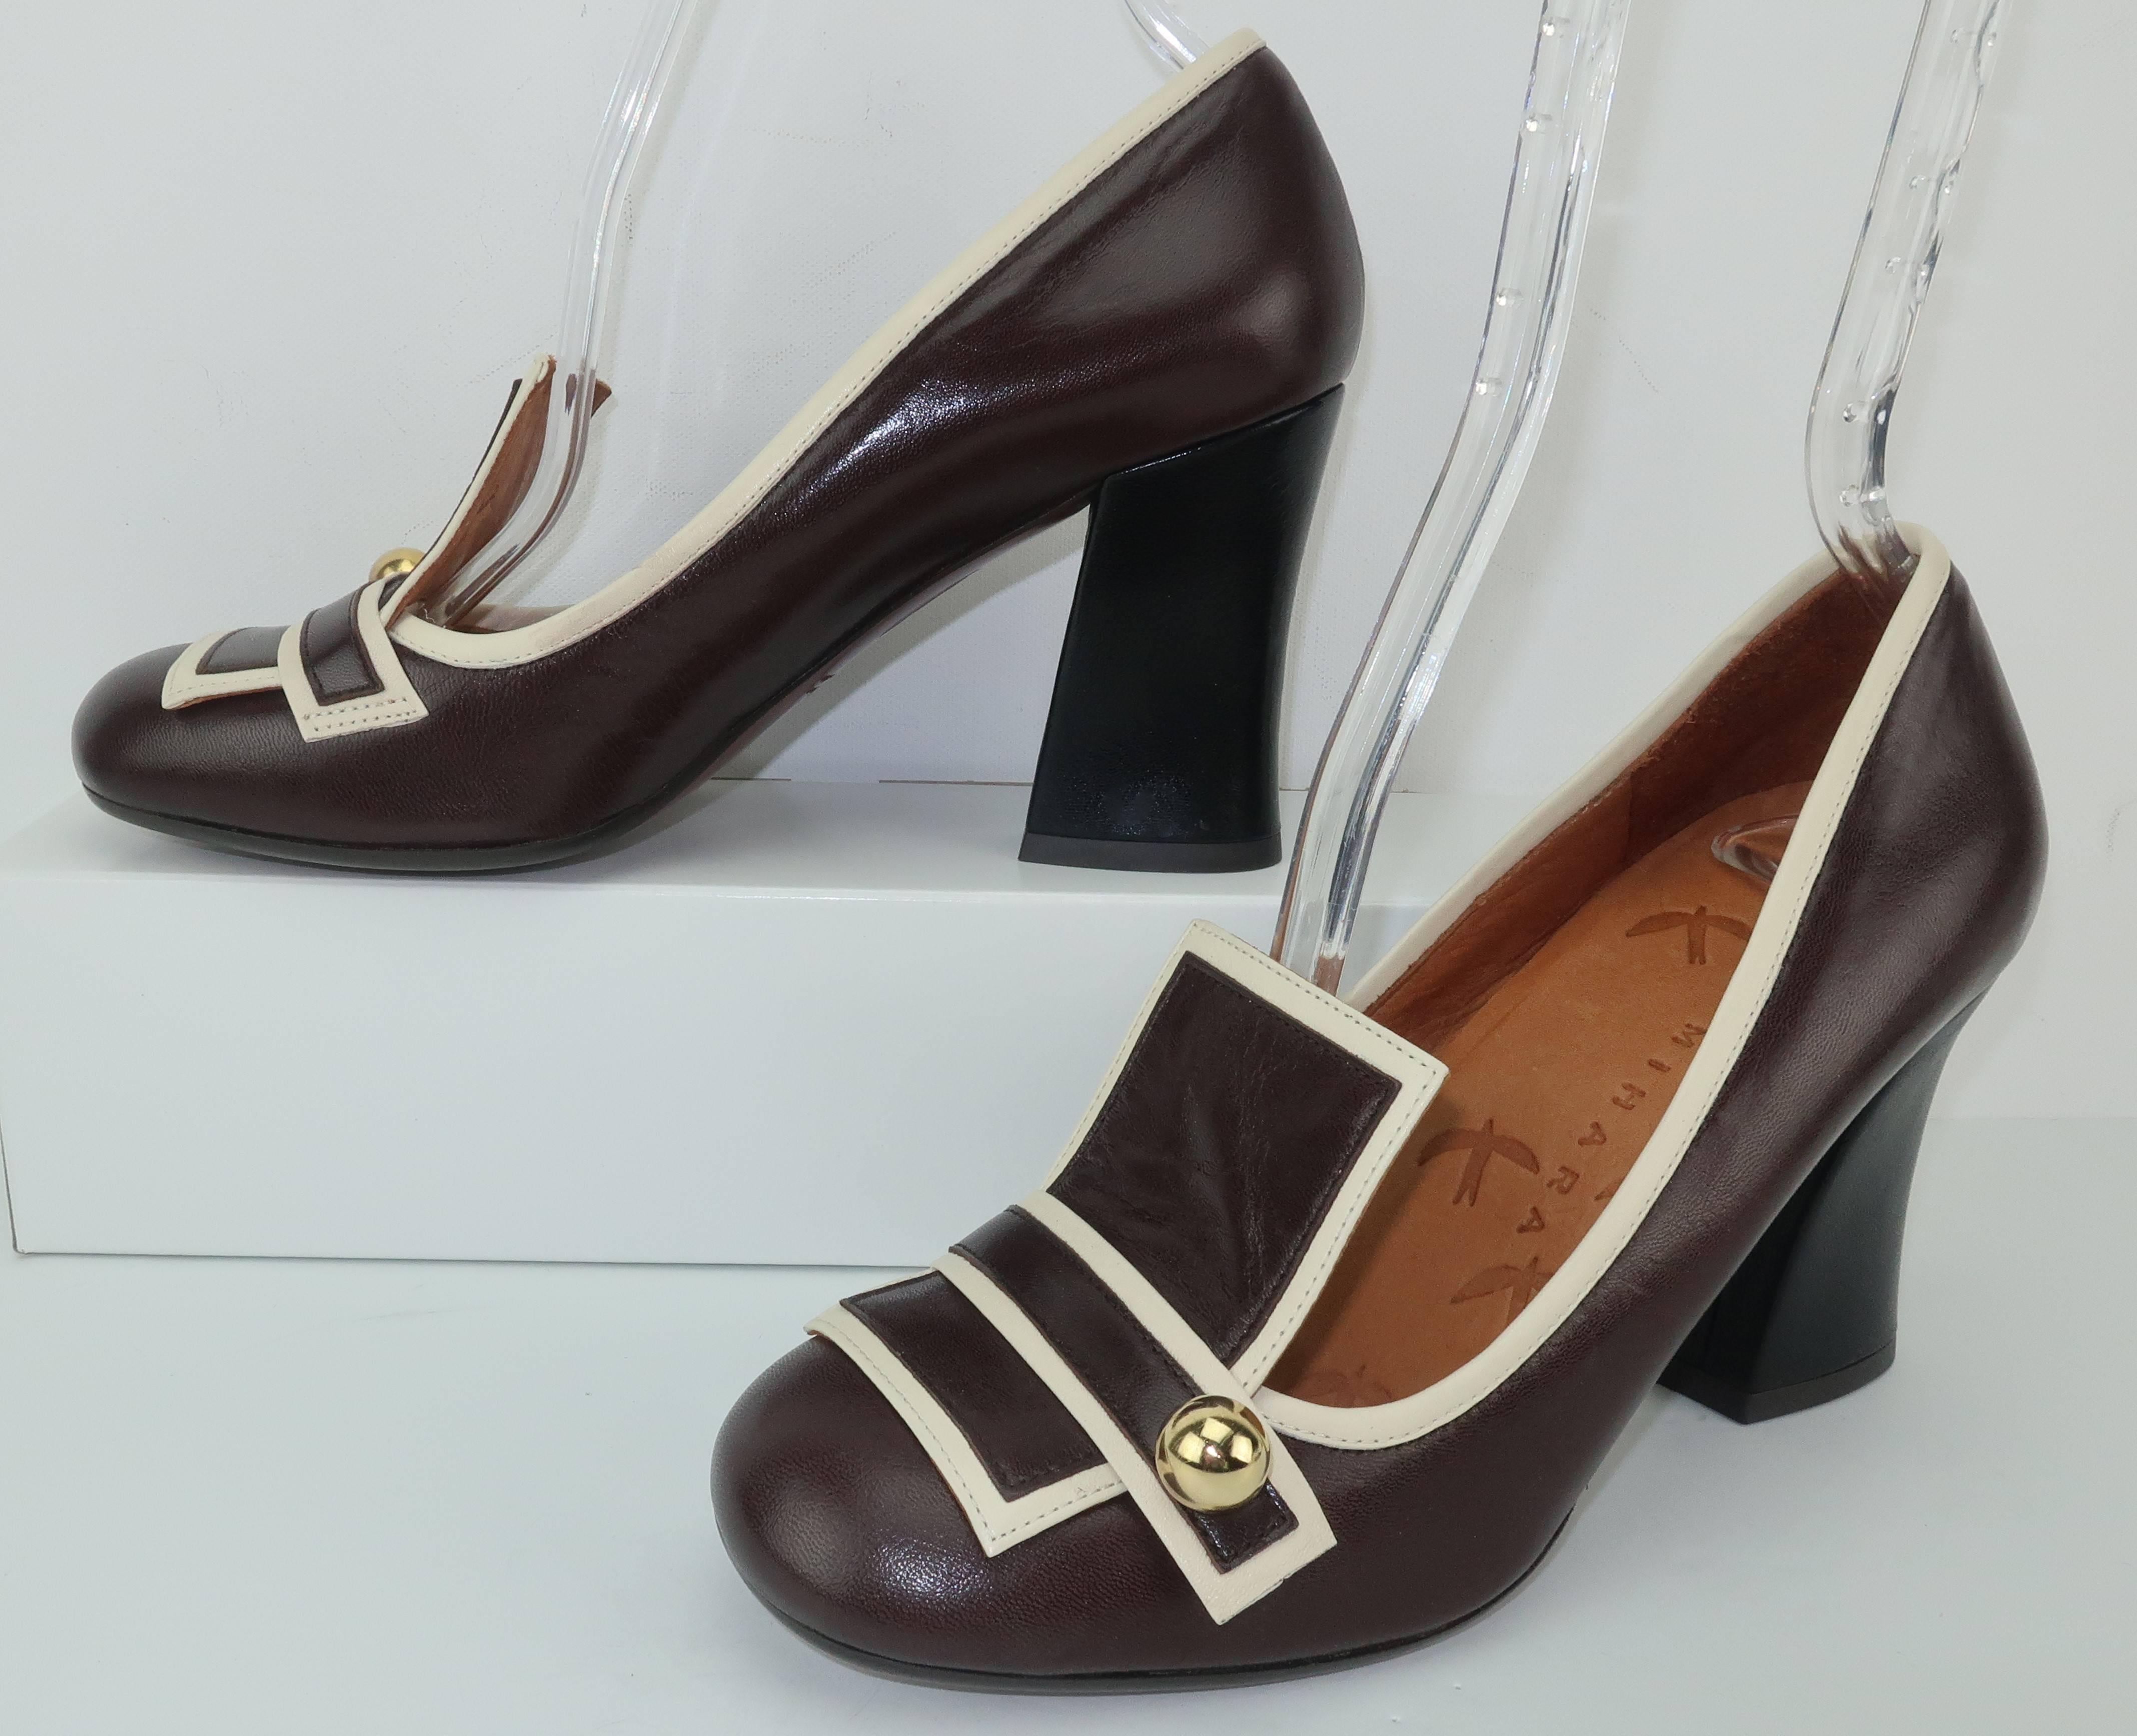 These contemporary shoes by Chie Mihara are a great homage to the fabulous mod footwear styles of the 1960's.  The two tone leather body combines a dark chocolate brown with an off-white trim in a graphic pattern embellished with a gold ball detail